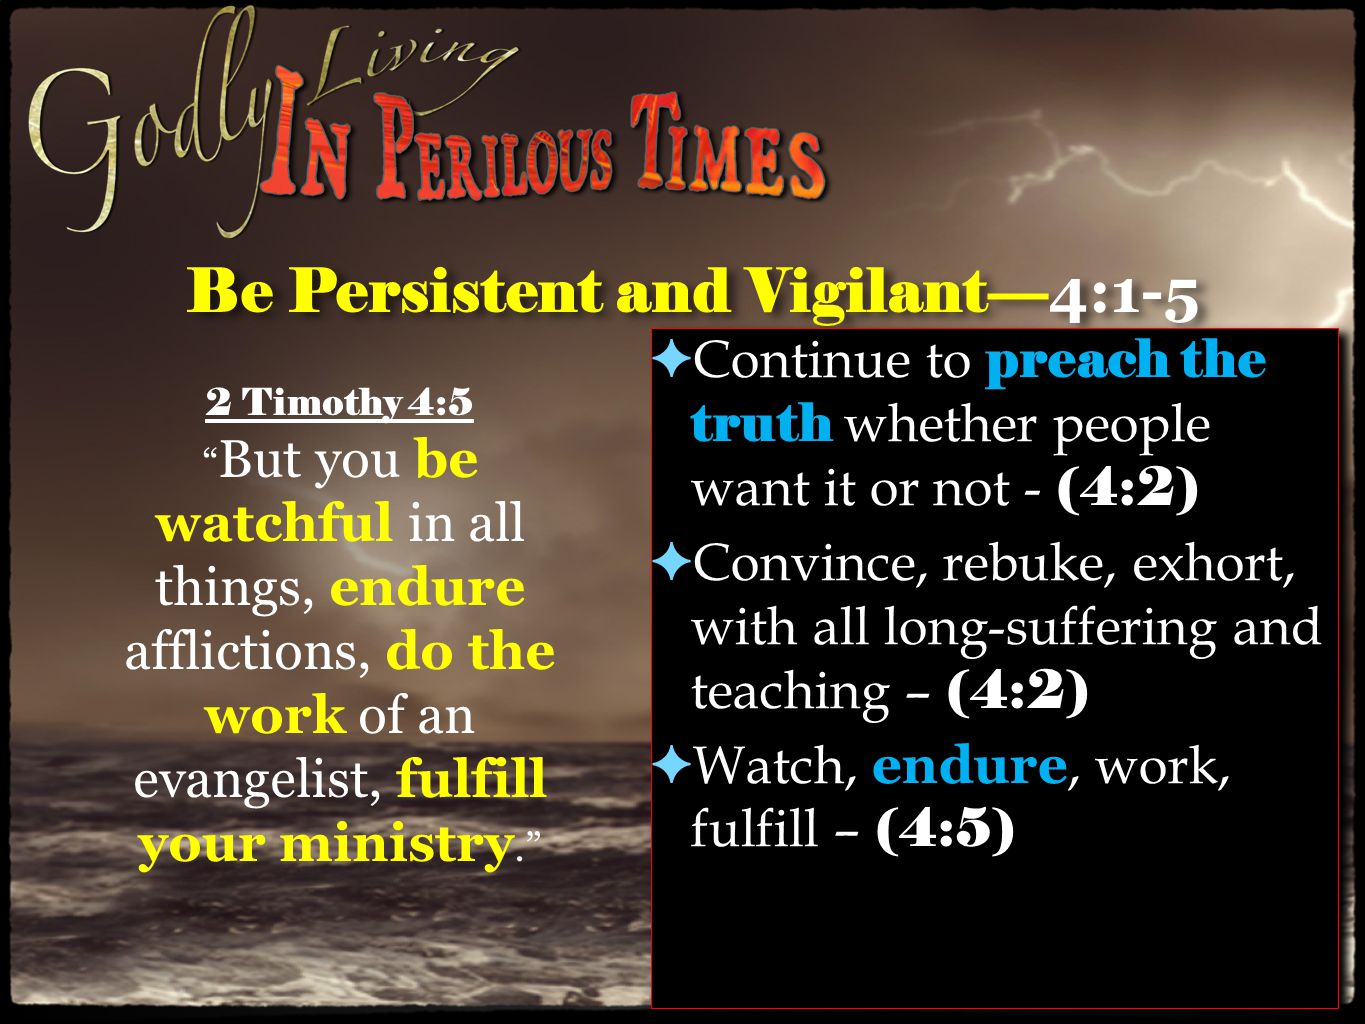 Be Persistent and Vigilant— 4:1-5 ✦ Continue to preach the truth whether people want it or not - (4:2) ✦ Convince, rebuke, exhort, with all long-suffering and teaching – (4:2) ✦ Watch, endure, work, fulfill – (4:5) ✦ Continue to preach the truth whether people want it or not - (4:2) ✦ Convince, rebuke, exhort, with all long-suffering and teaching – (4:2) ✦ Watch, endure, work, fulfill – (4:5) 2 Timothy 4:5 But you be watchful in all things, endure afflictions, do the work of an evangelist, fulfill your ministry.